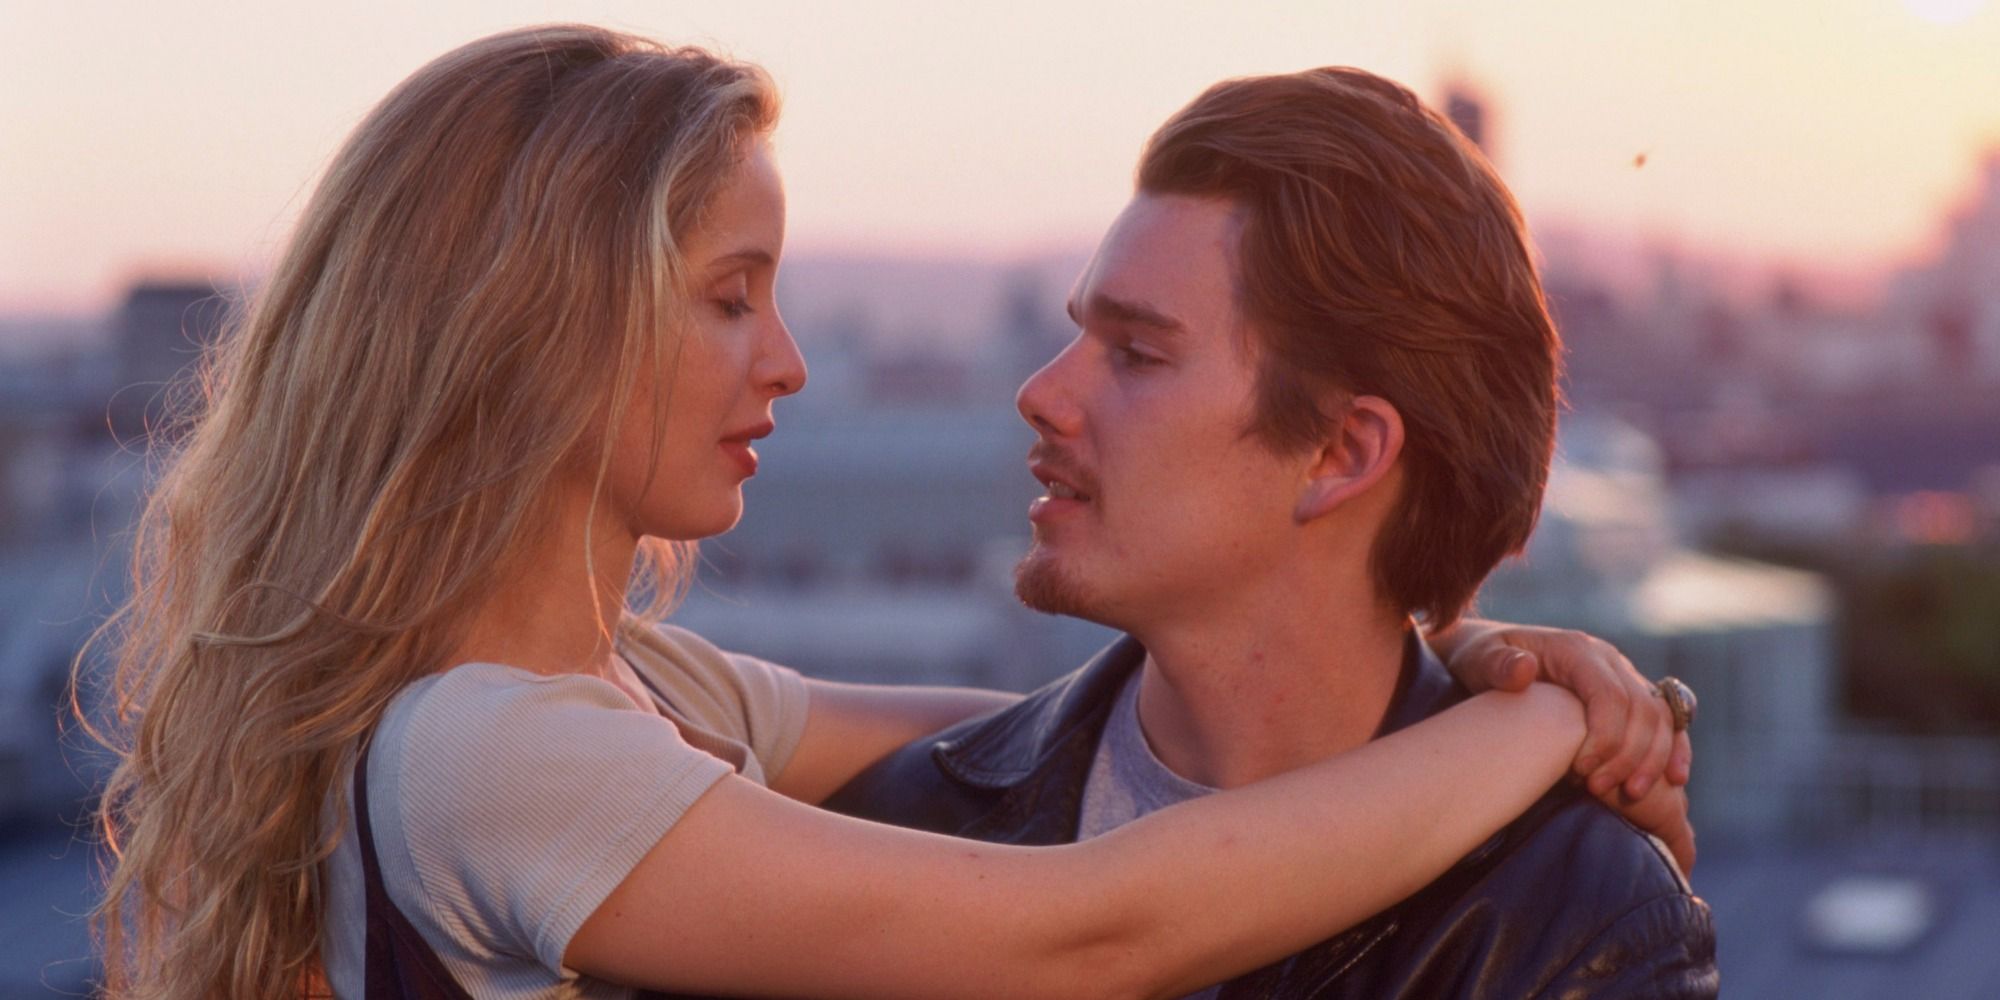 Ethan Hawke and Julie Delpy in 'Before Sunrise'